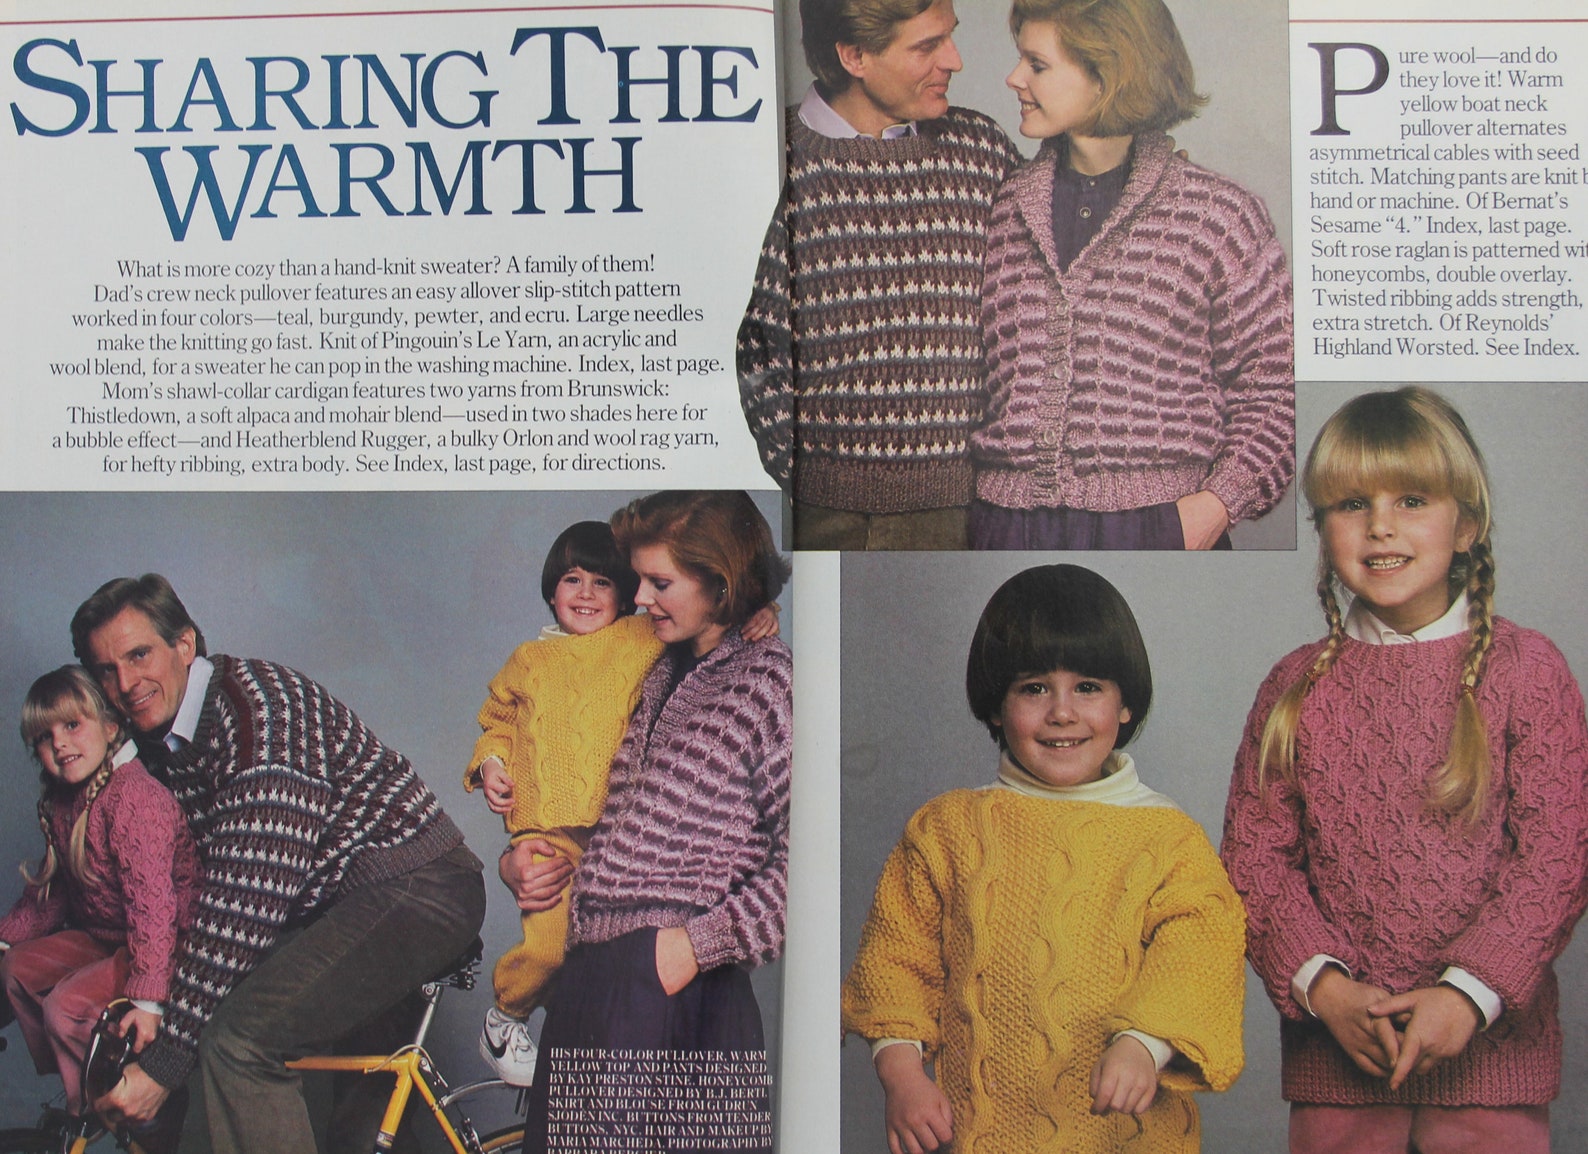 Knitting Patterns McCall's Needlework & Crafts August | Etsy